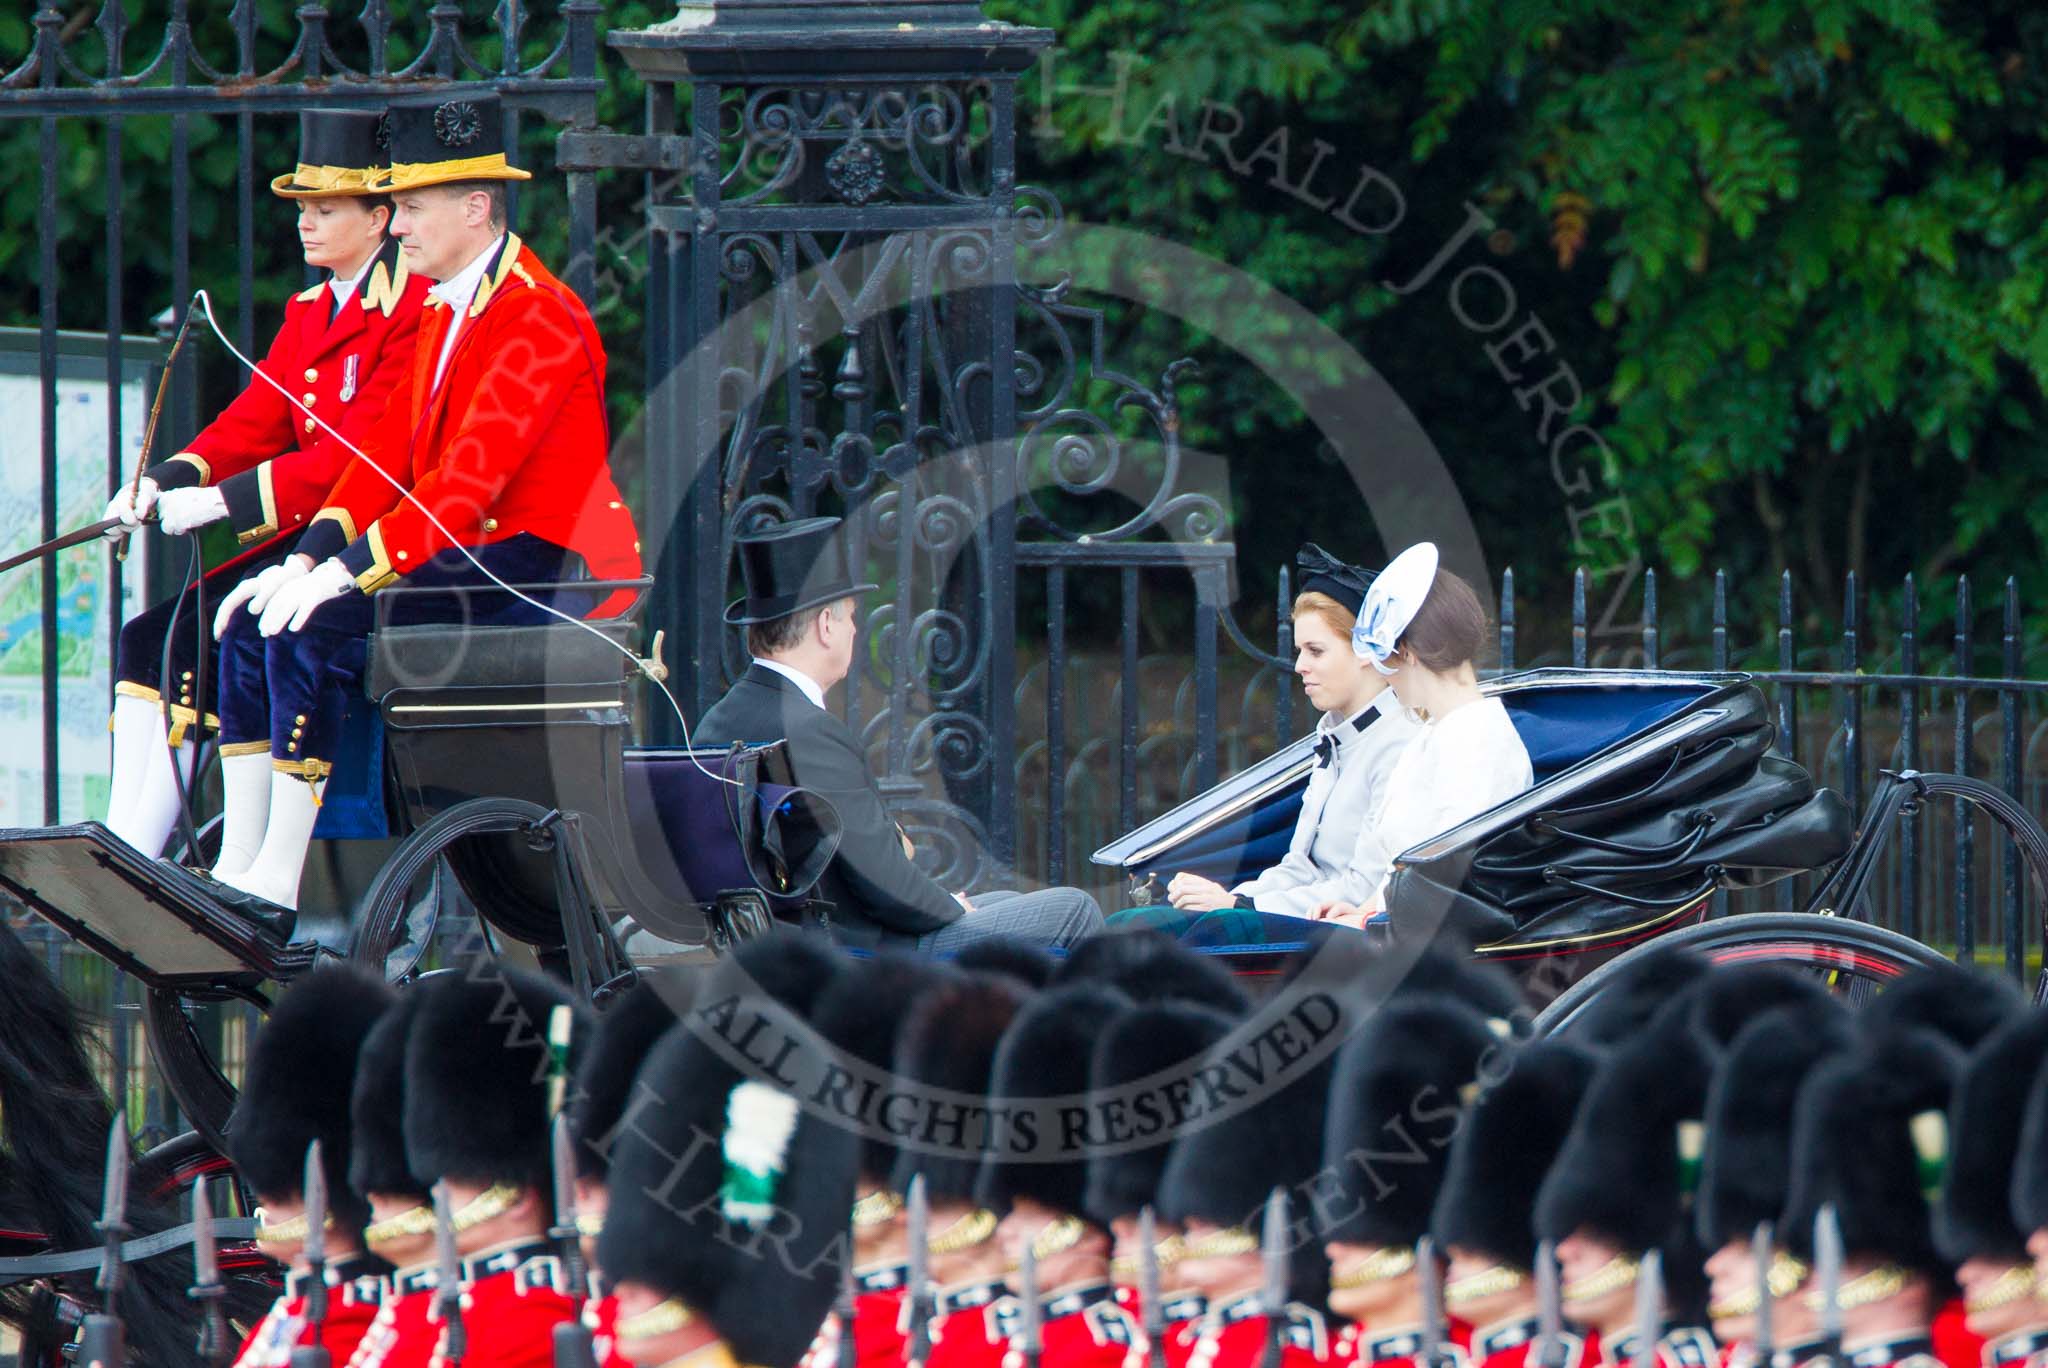 Trooping the Colour 2013: HRH The Duke of York  and his daughters, HRH Princess Beatrice of York and HRH Princess Eugenie of York in the second barouche carriage on the way across Horse Guards Parade to watch the parade from the Major General's office. Image #191, 15 June 2013 10:49 Horse Guards Parade, London, UK